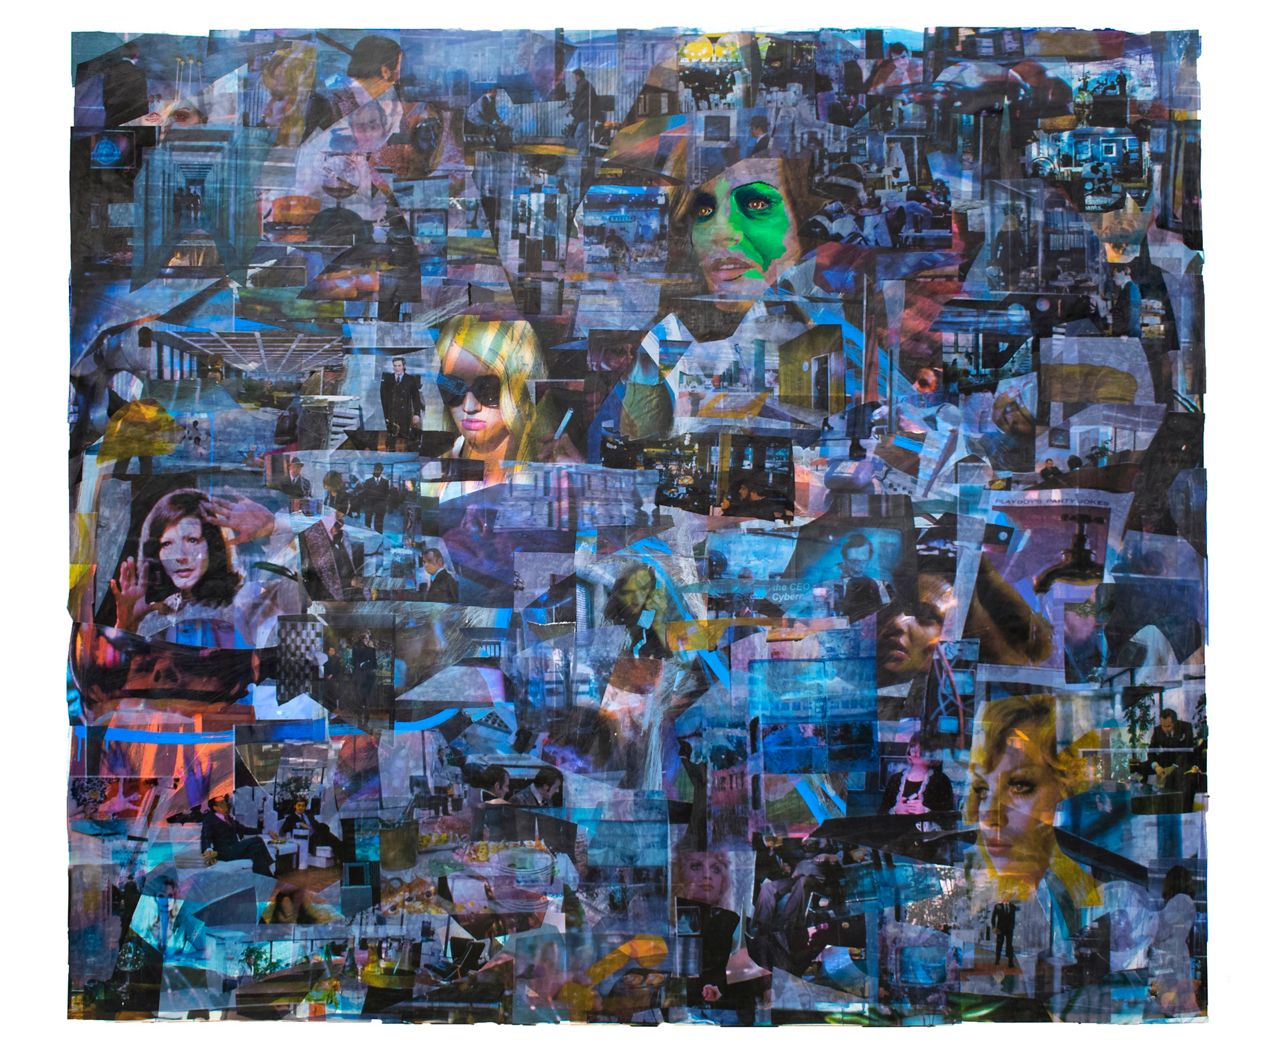 Clair Morey, Luxuries, 2021. Photo transparency, acrylic, and oil on canvas, 84 x 96 inches. (Courtesy of the artist)